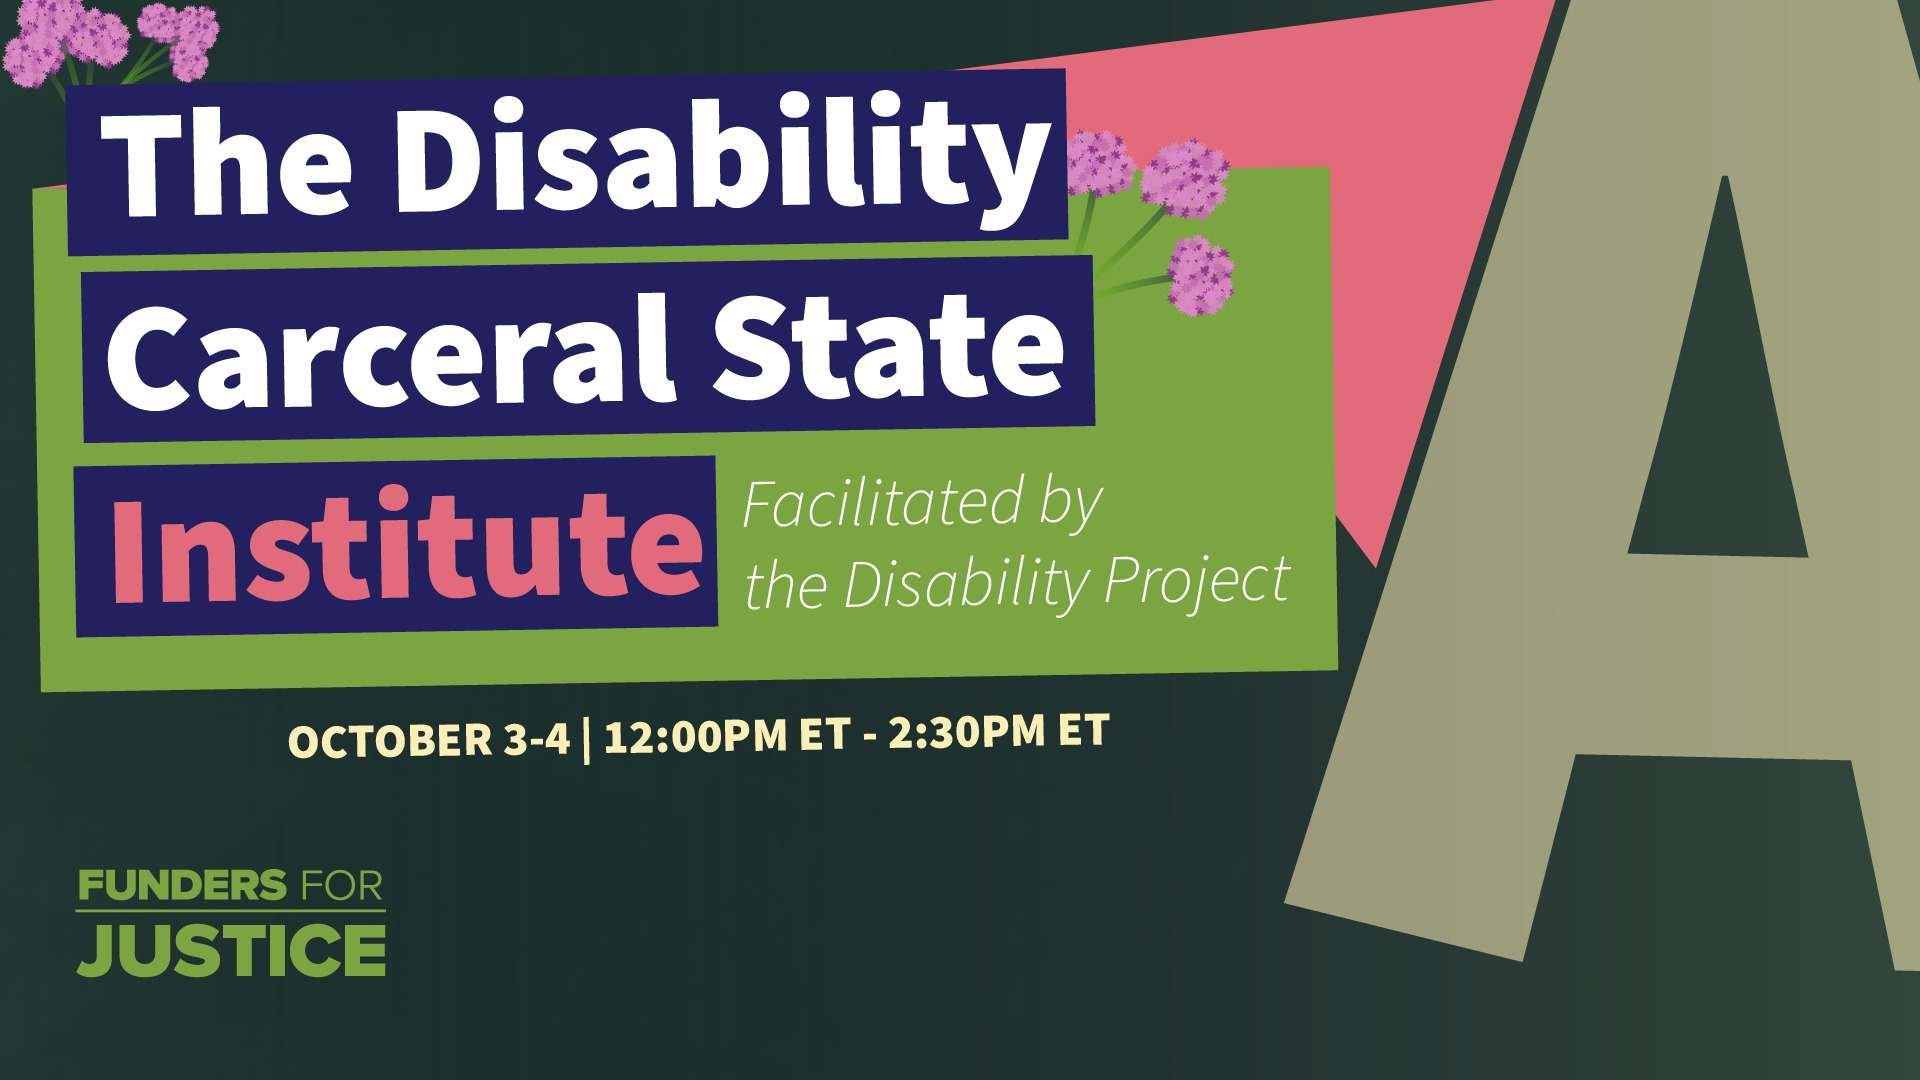 Invitation to the Disability Carceral State Institute Zoom Event, October 3-4, 2023, 12:30pm - 2:00pm ET. The green invitation features pink flowers and a prominent 'A' symbolizing abolition on the right-hand side. The Funders for Justice organization logo is displayed in the bottom left corner.